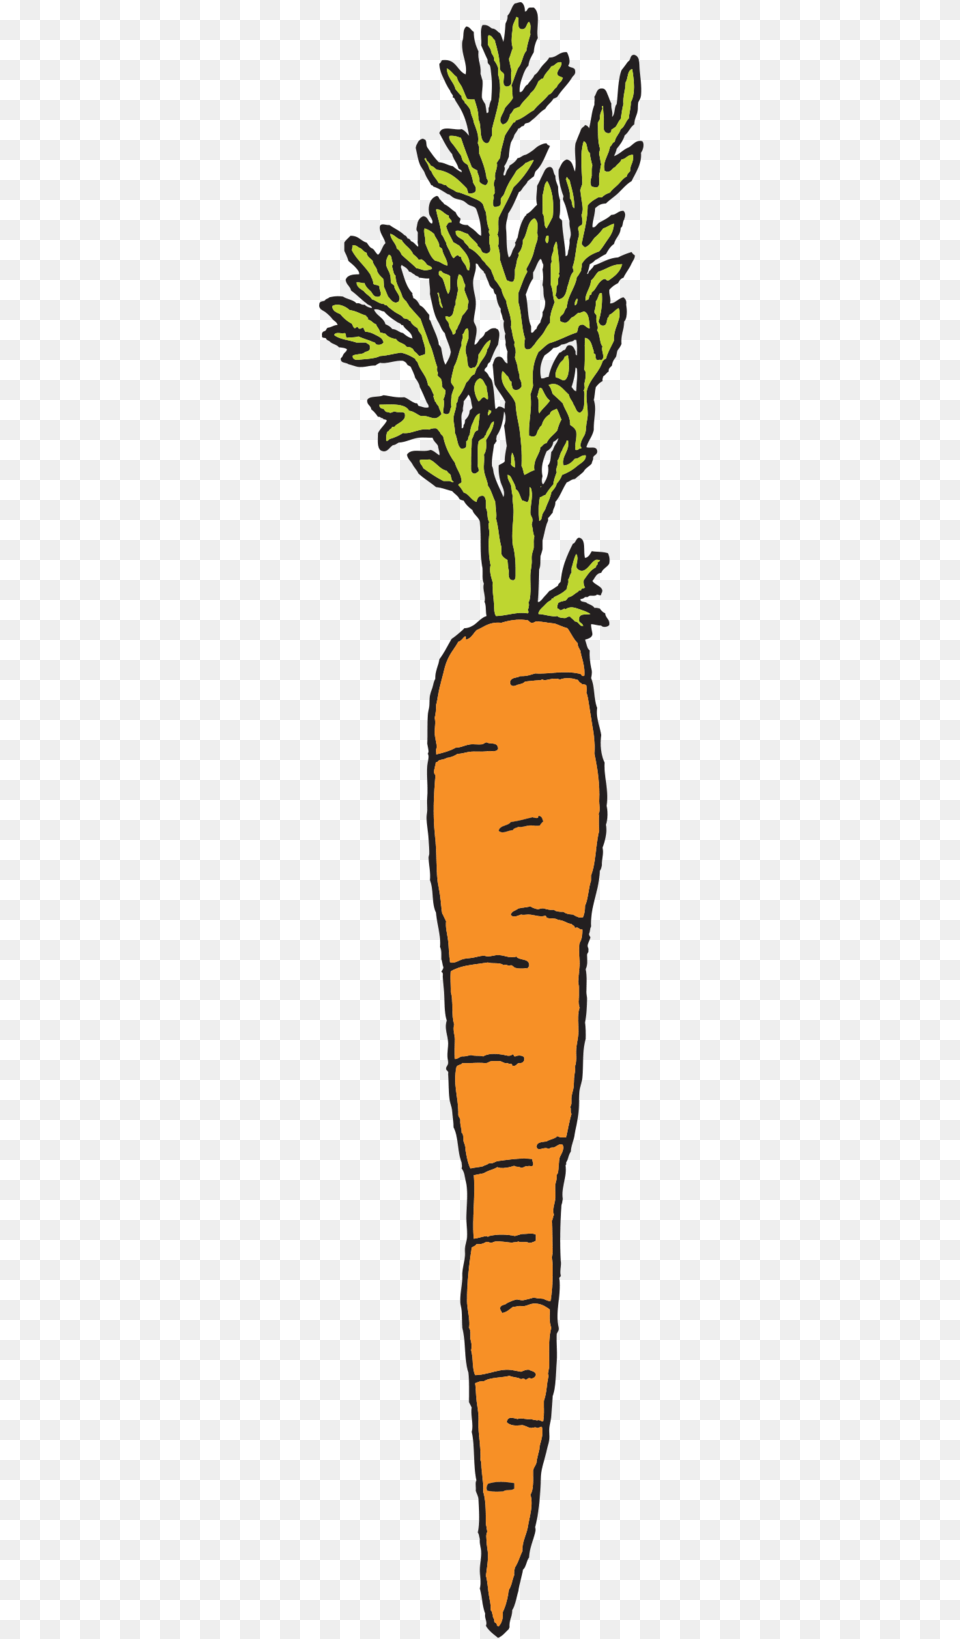 Carrot Carrot Carrot Carrot Tattly, Food, Plant, Produce, Vegetable Png